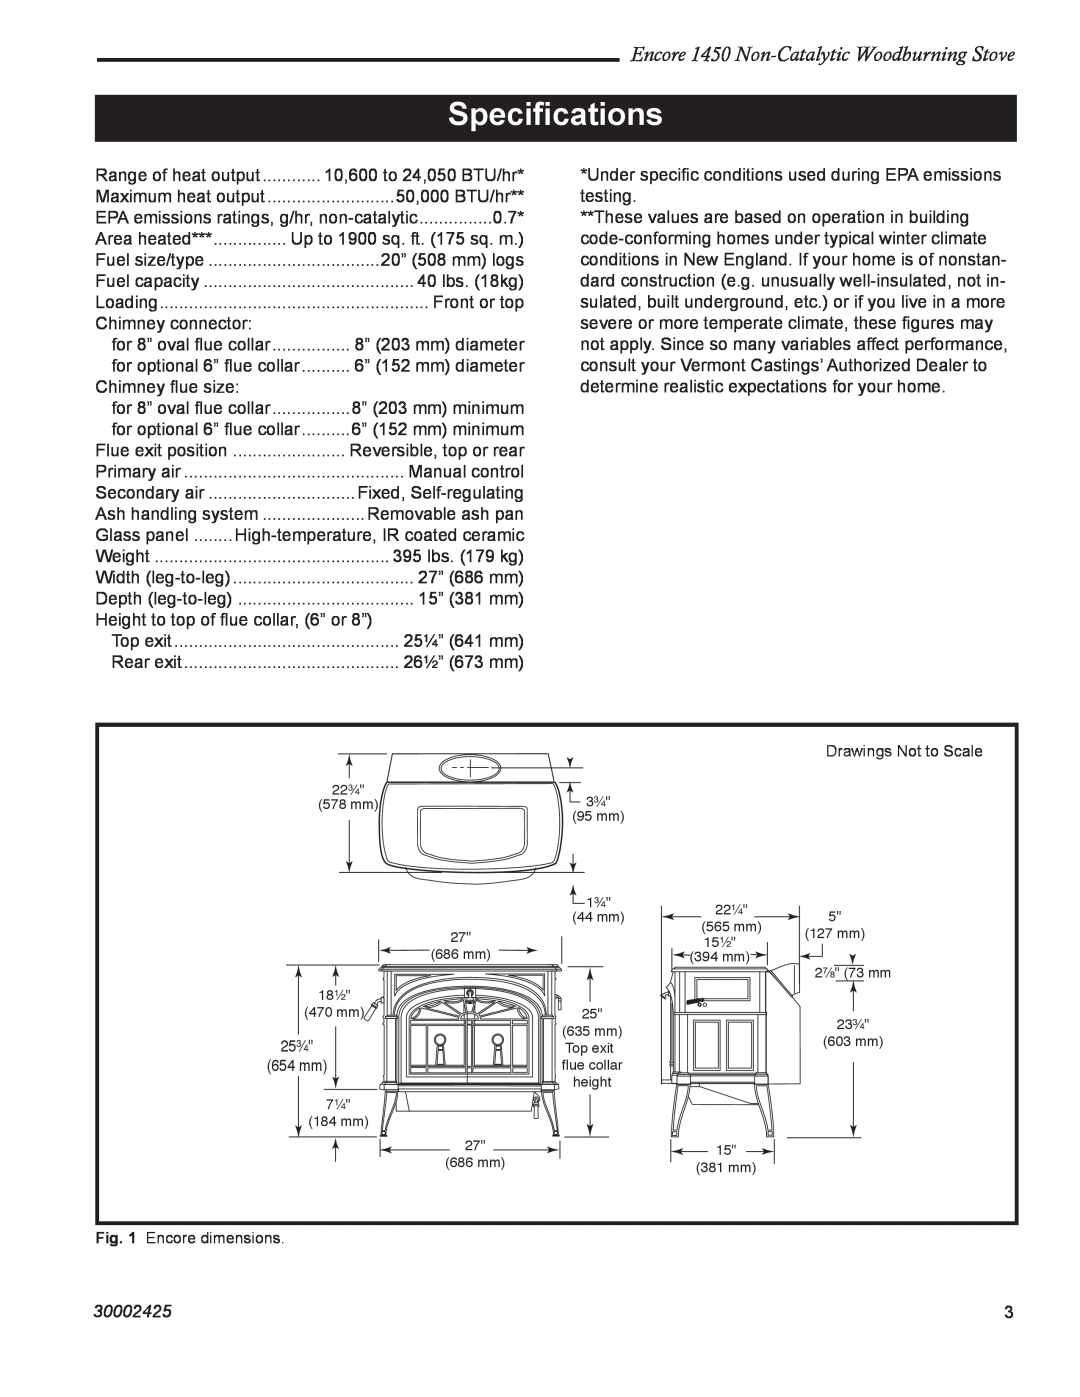 Vermont Casting installation instructions Speciﬁcations, Encore 1450 Non-CatalyticWoodburning Stove, 30002425 